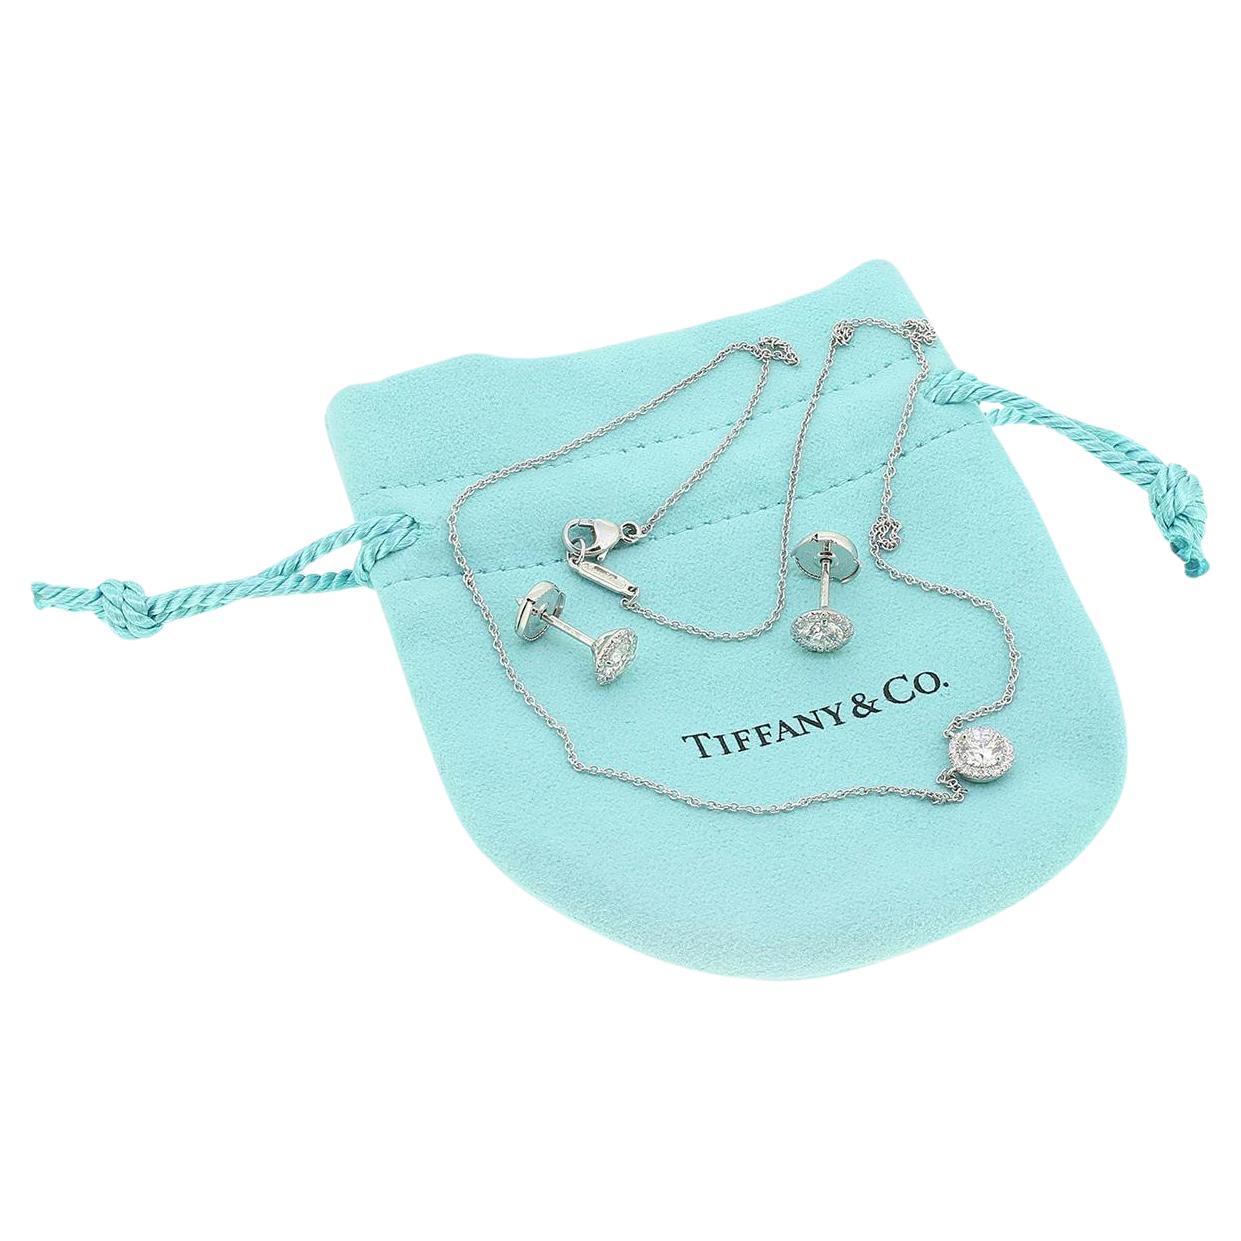 Tiffany & Co. Soleste Diamond Necklace and Earrings Set